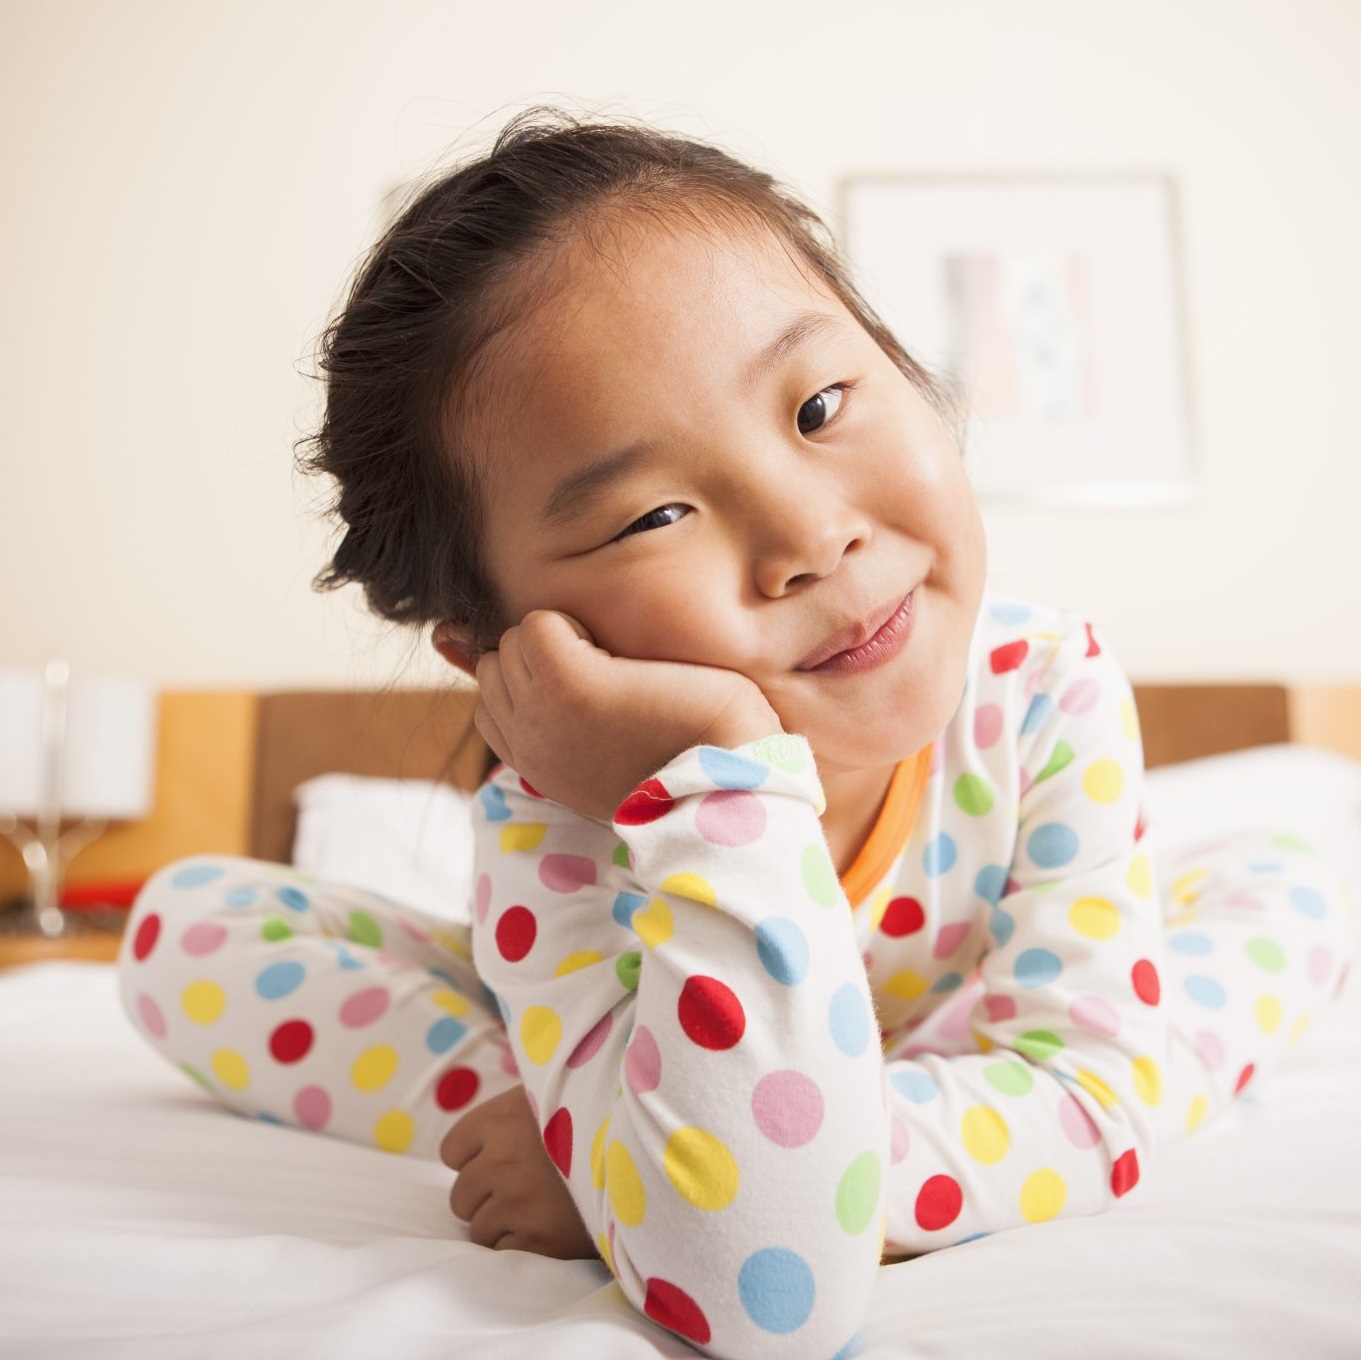 Child sitting on bed